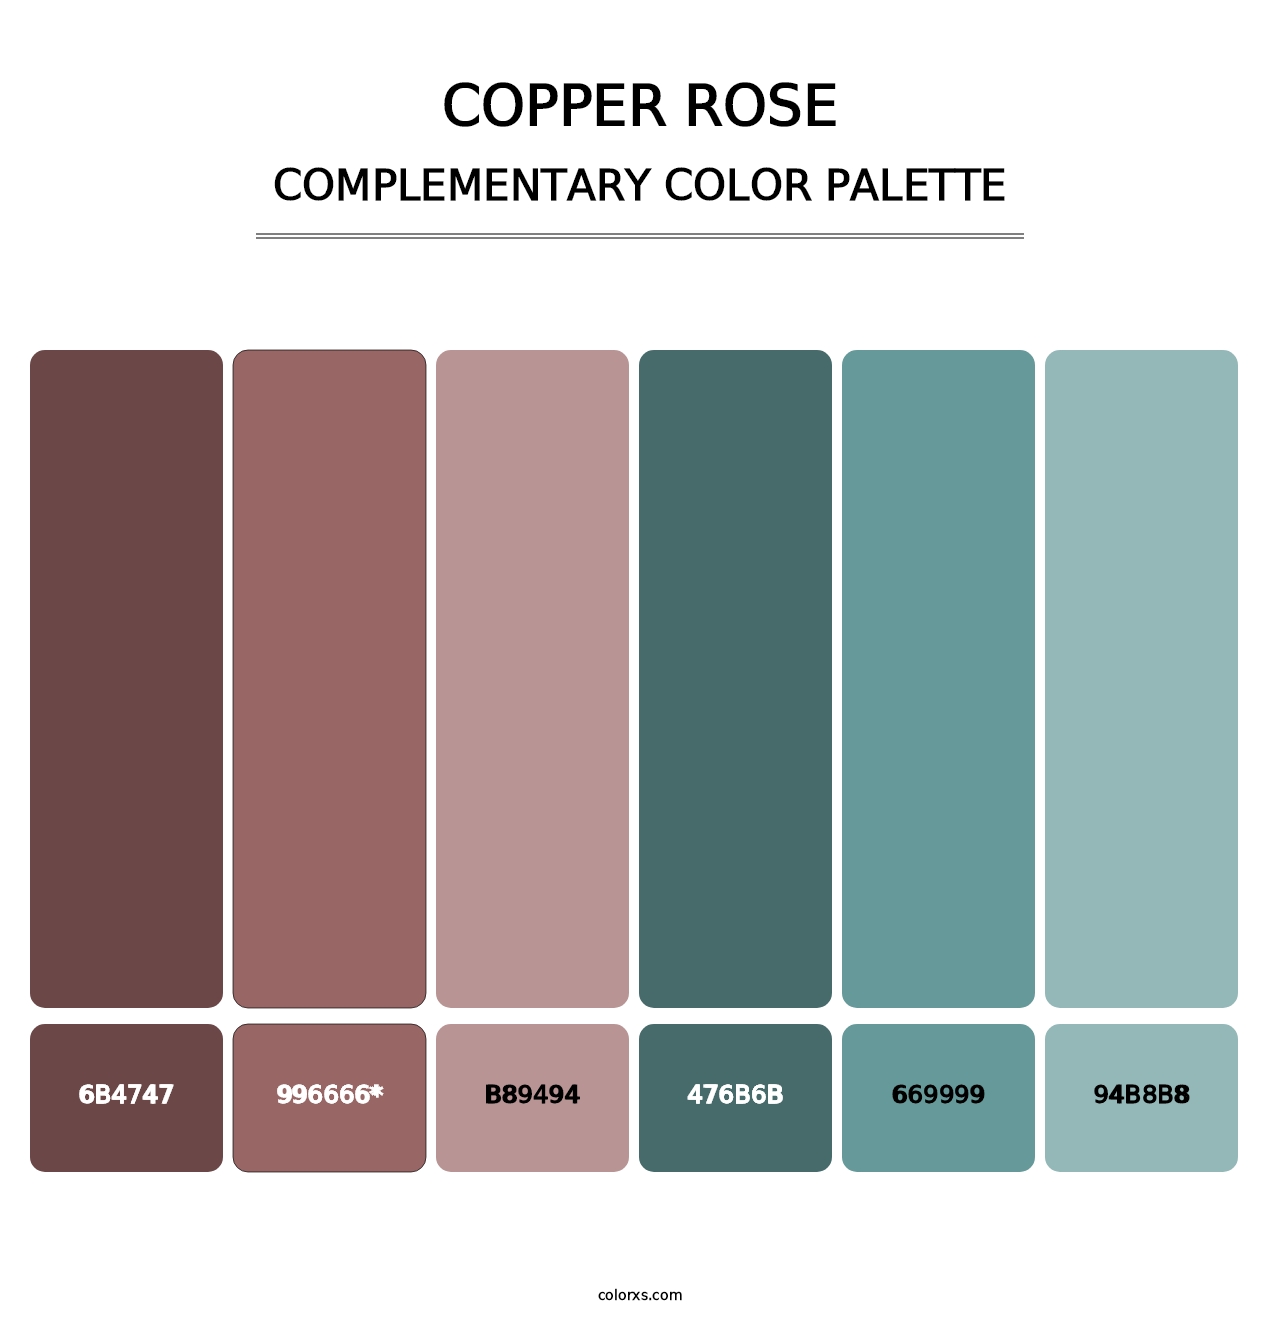 Copper rose - Complementary Color Palette